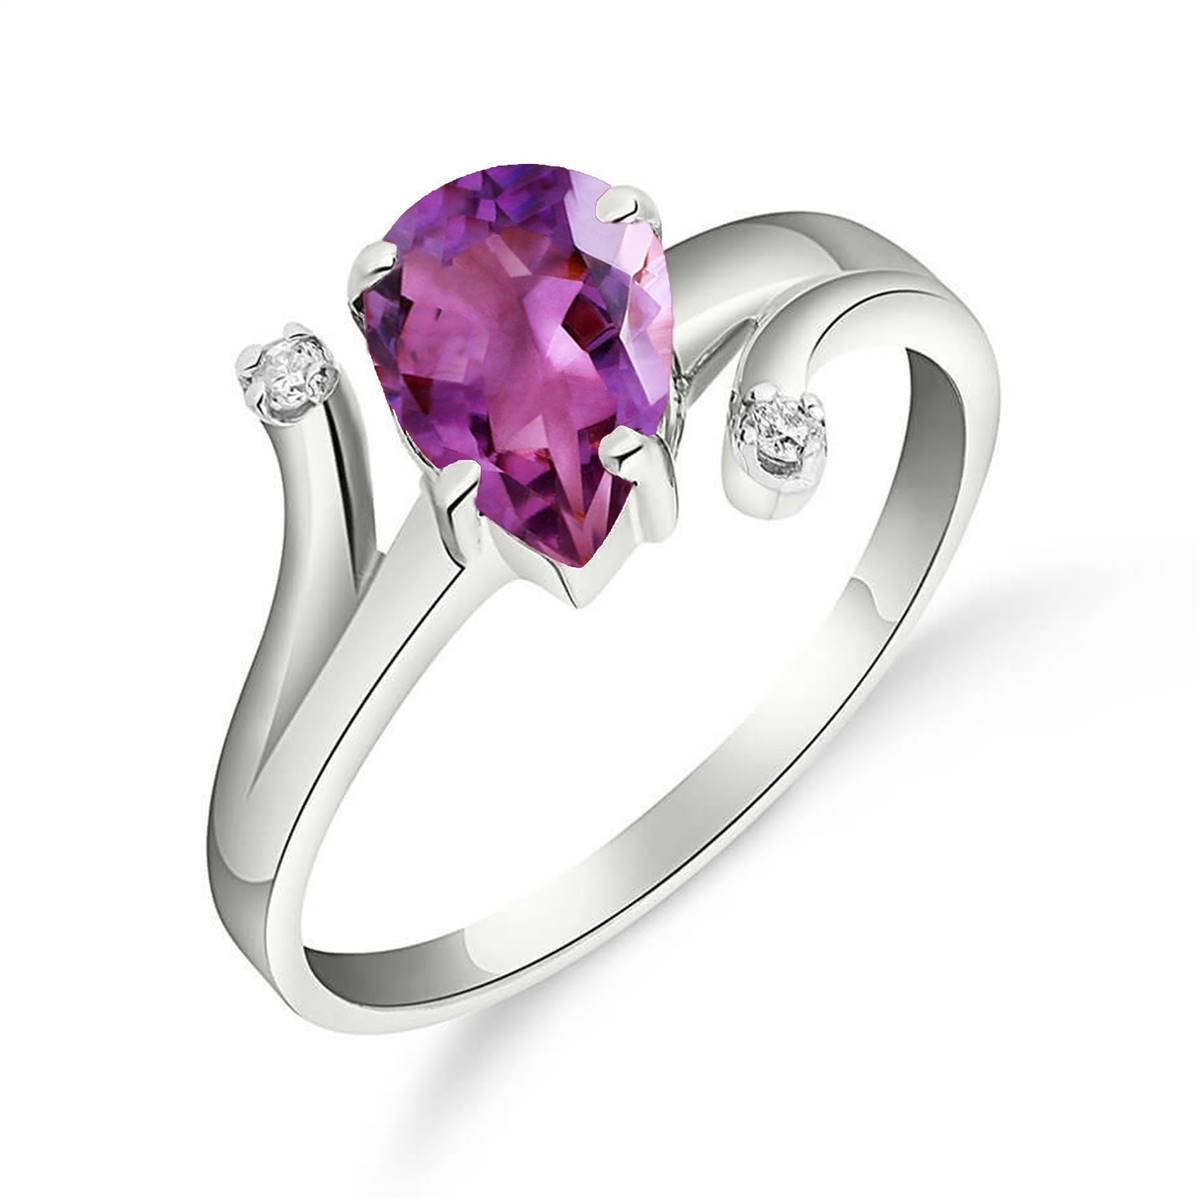 1.51 Carat 14K Solid White Gold Great Gesture Amethyst Diamond Ring